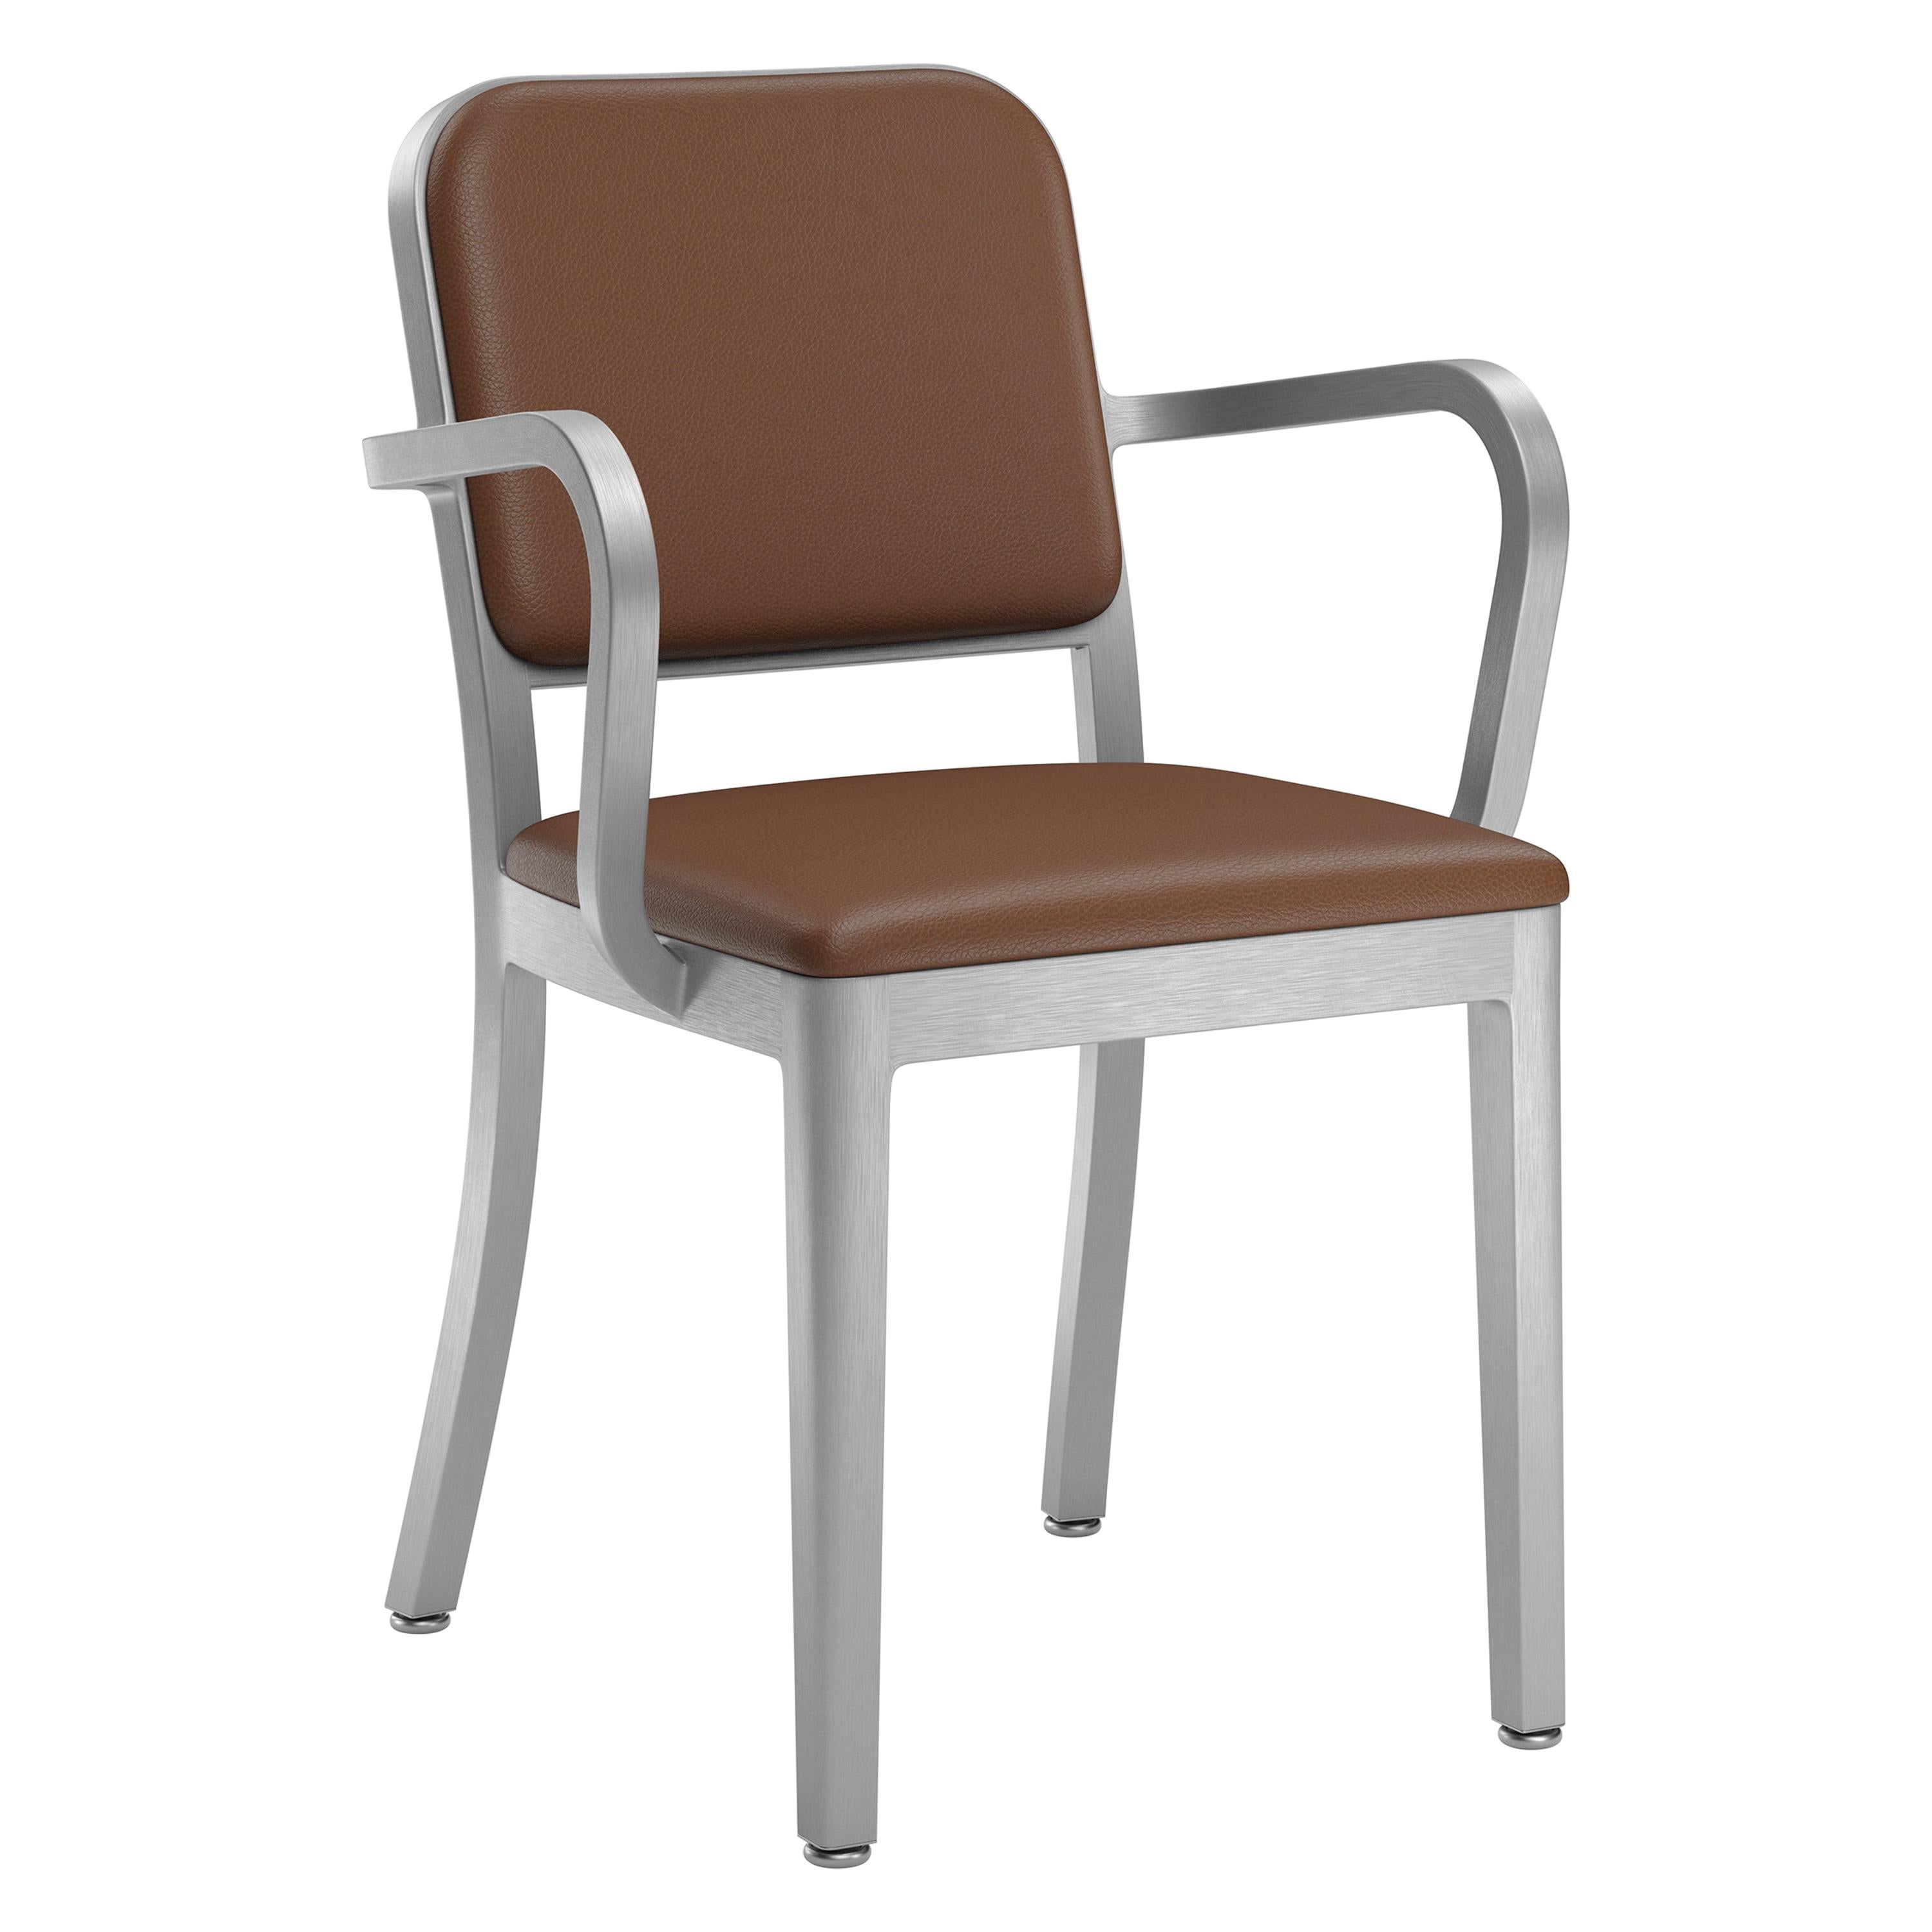 Emeco Navy Officer Armchair in Brown Leather with Brushed Aluminum Frame